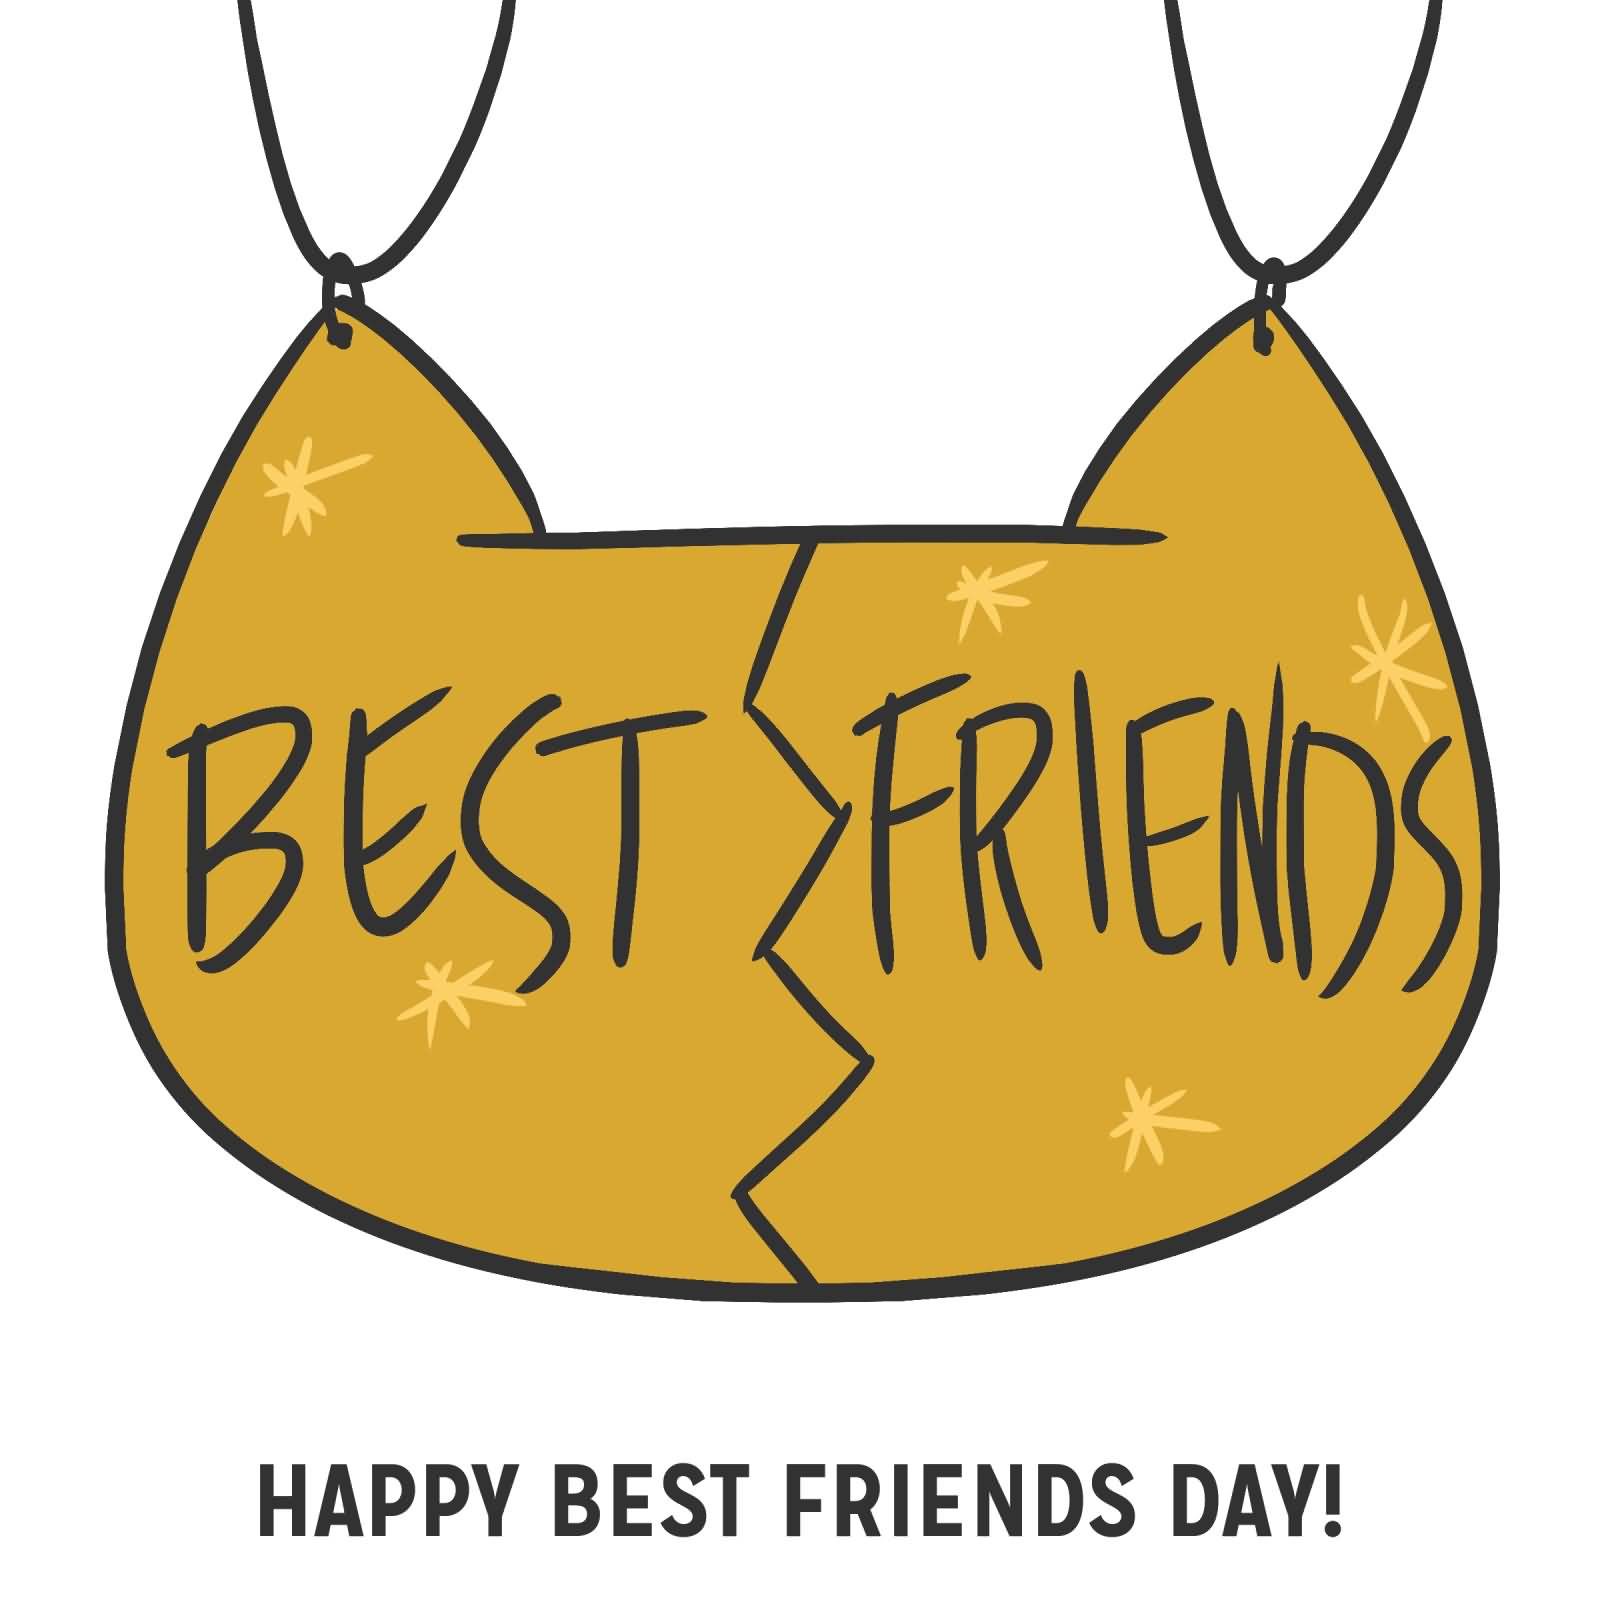 Happy Best Friends Day Greetings Image